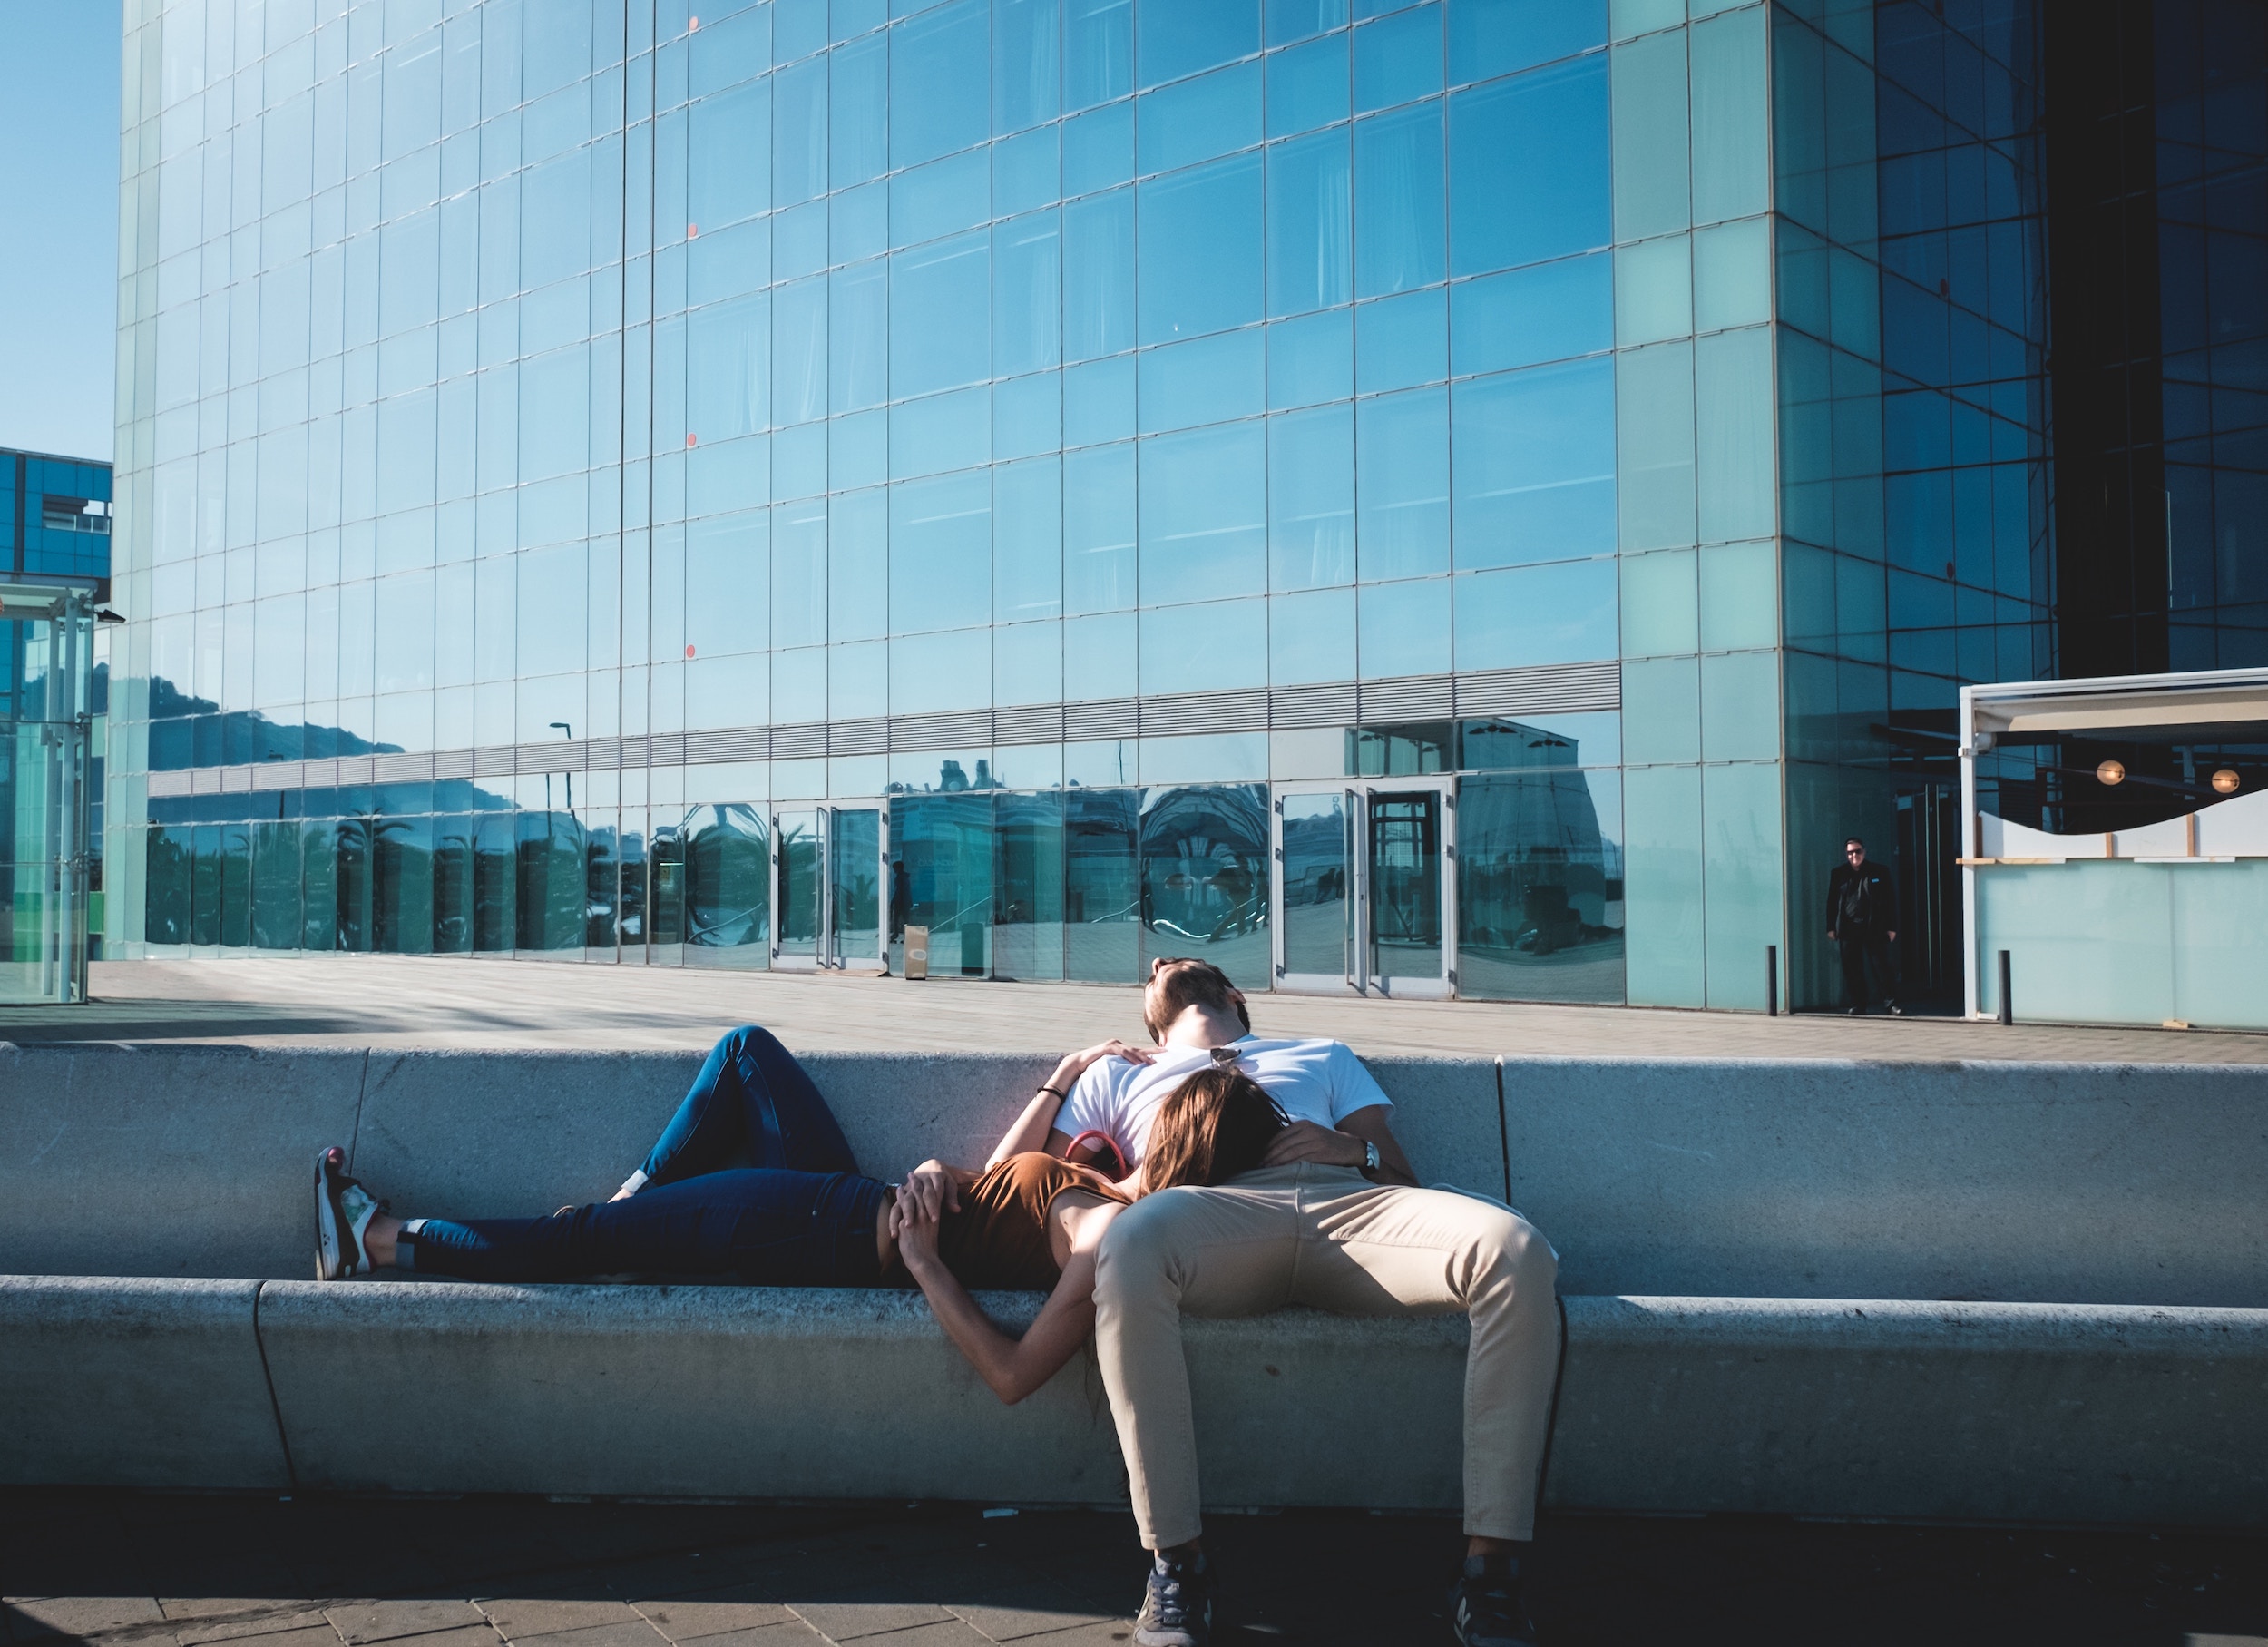 A couple taking it easy on the steps of a city building